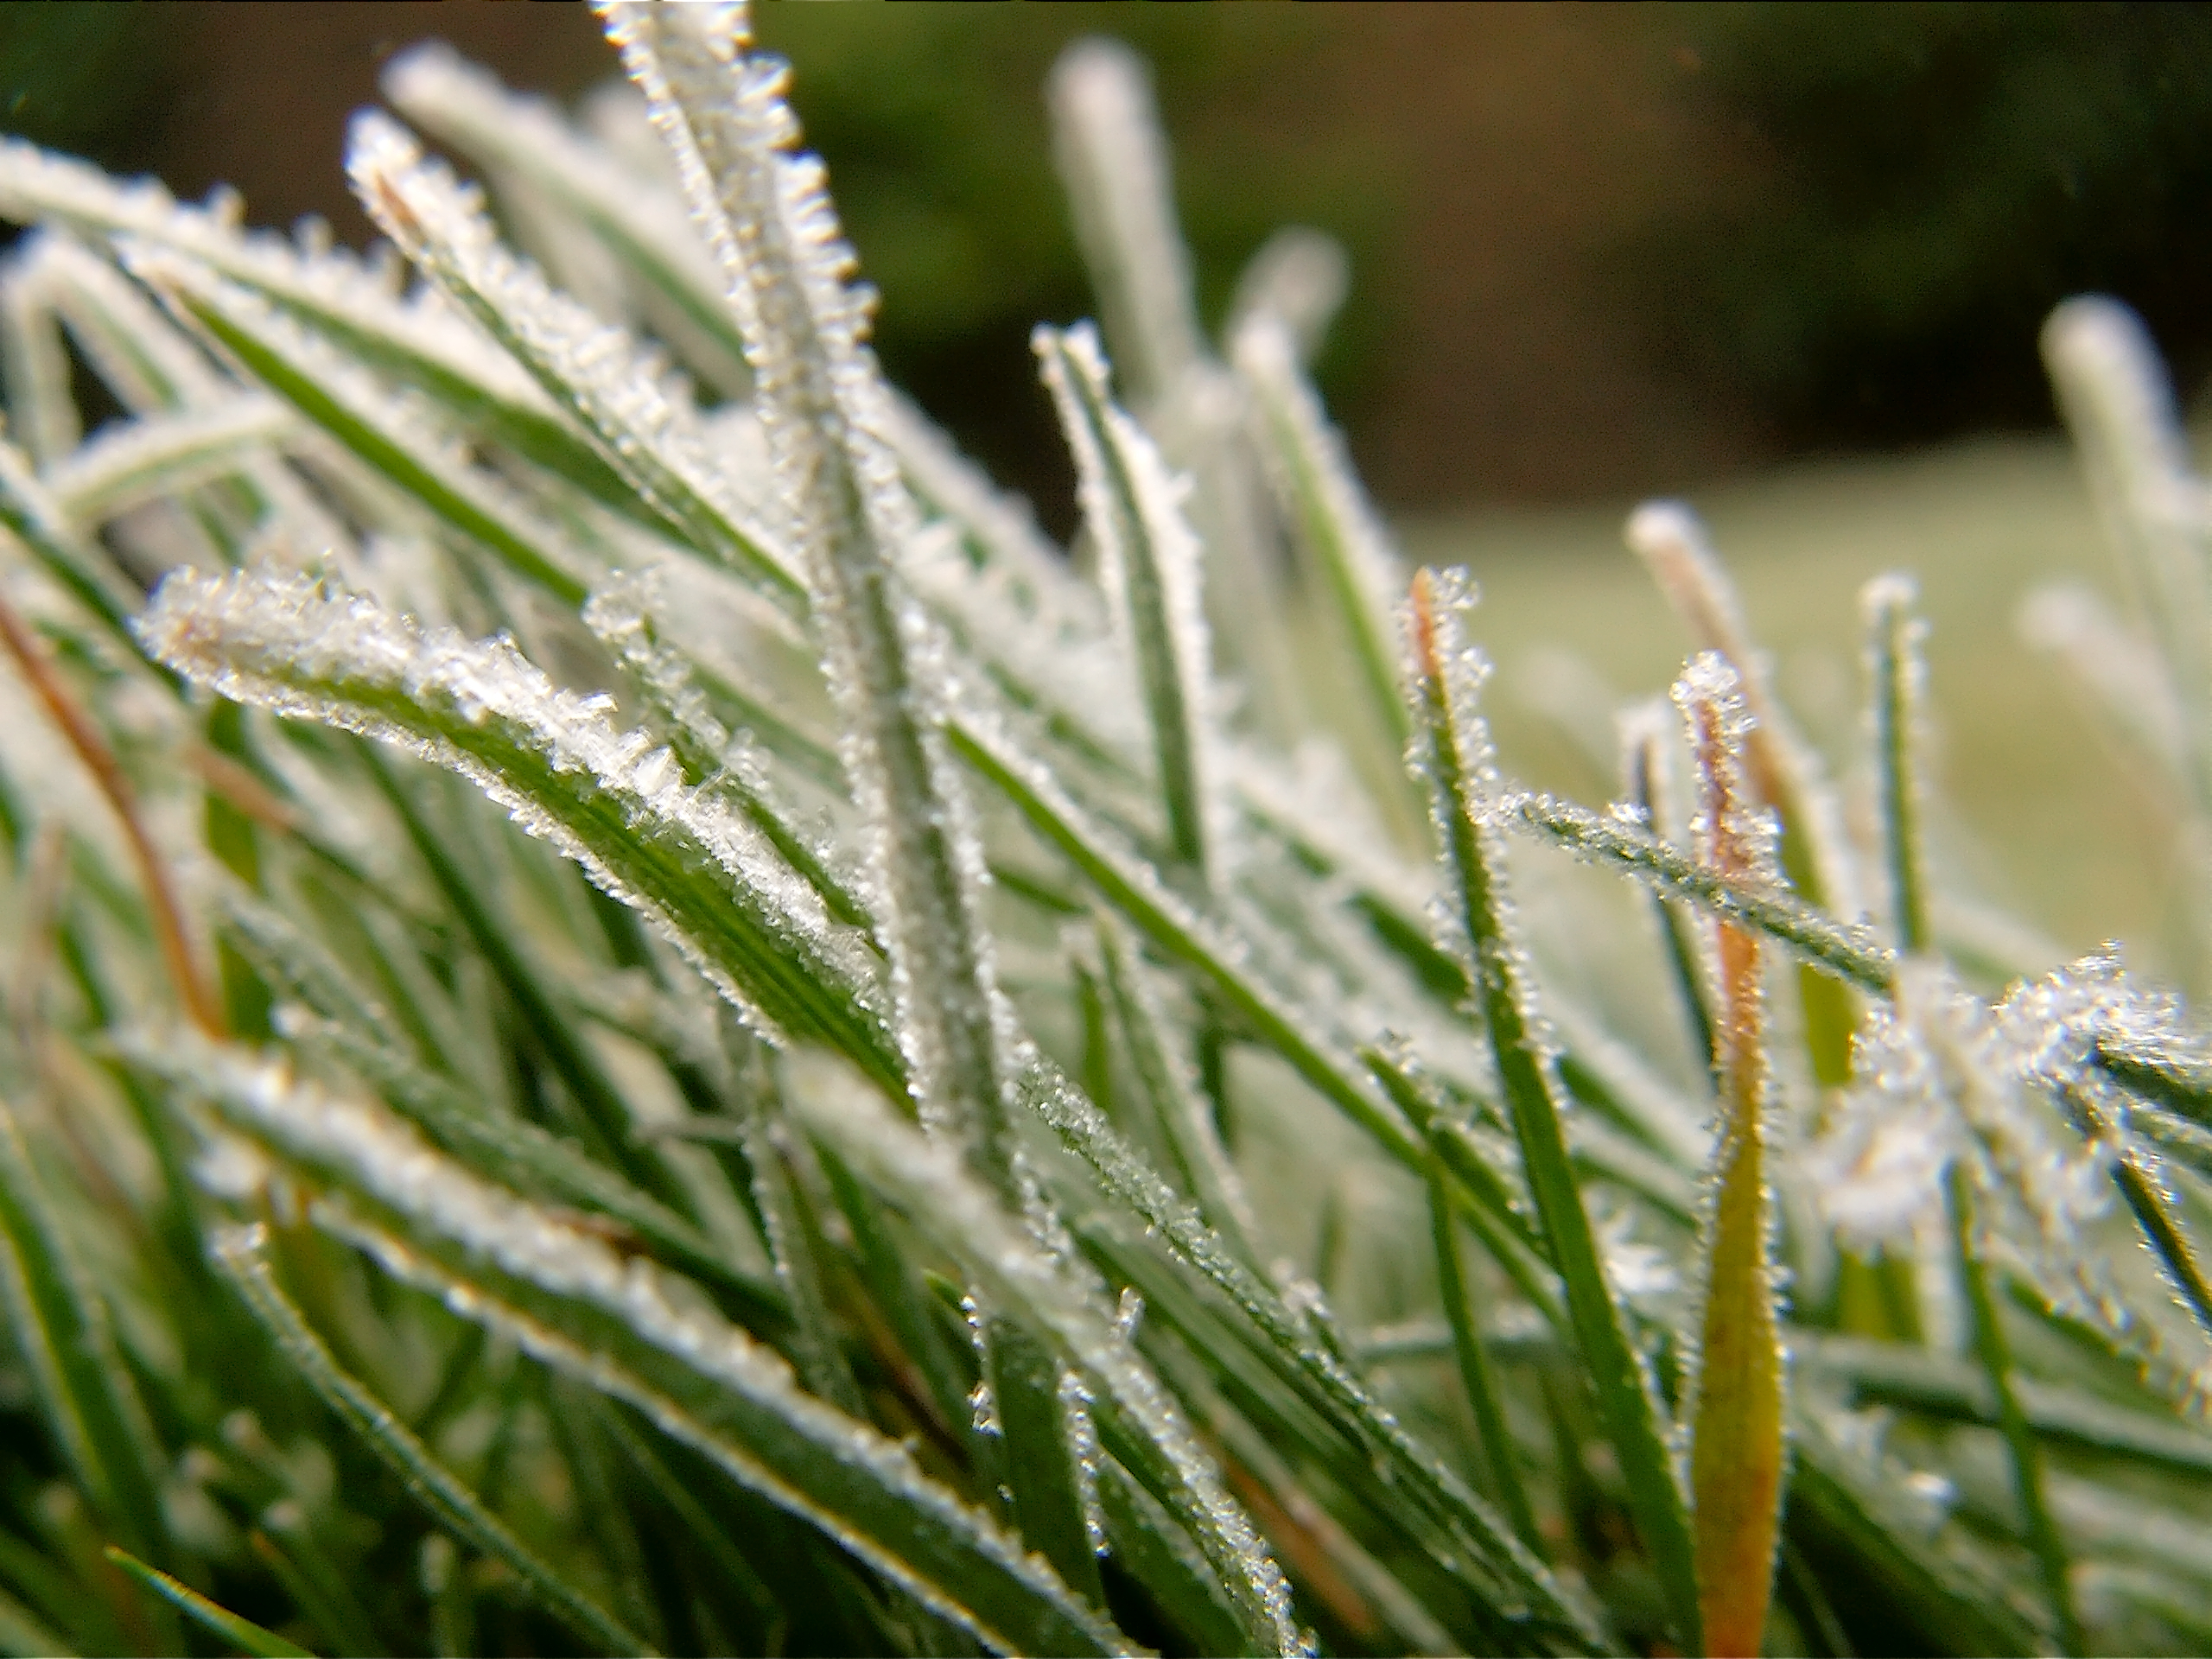 Keep Off The Frozen Lawn To Avoid Breaking Grass Blades- Lawn Seeds